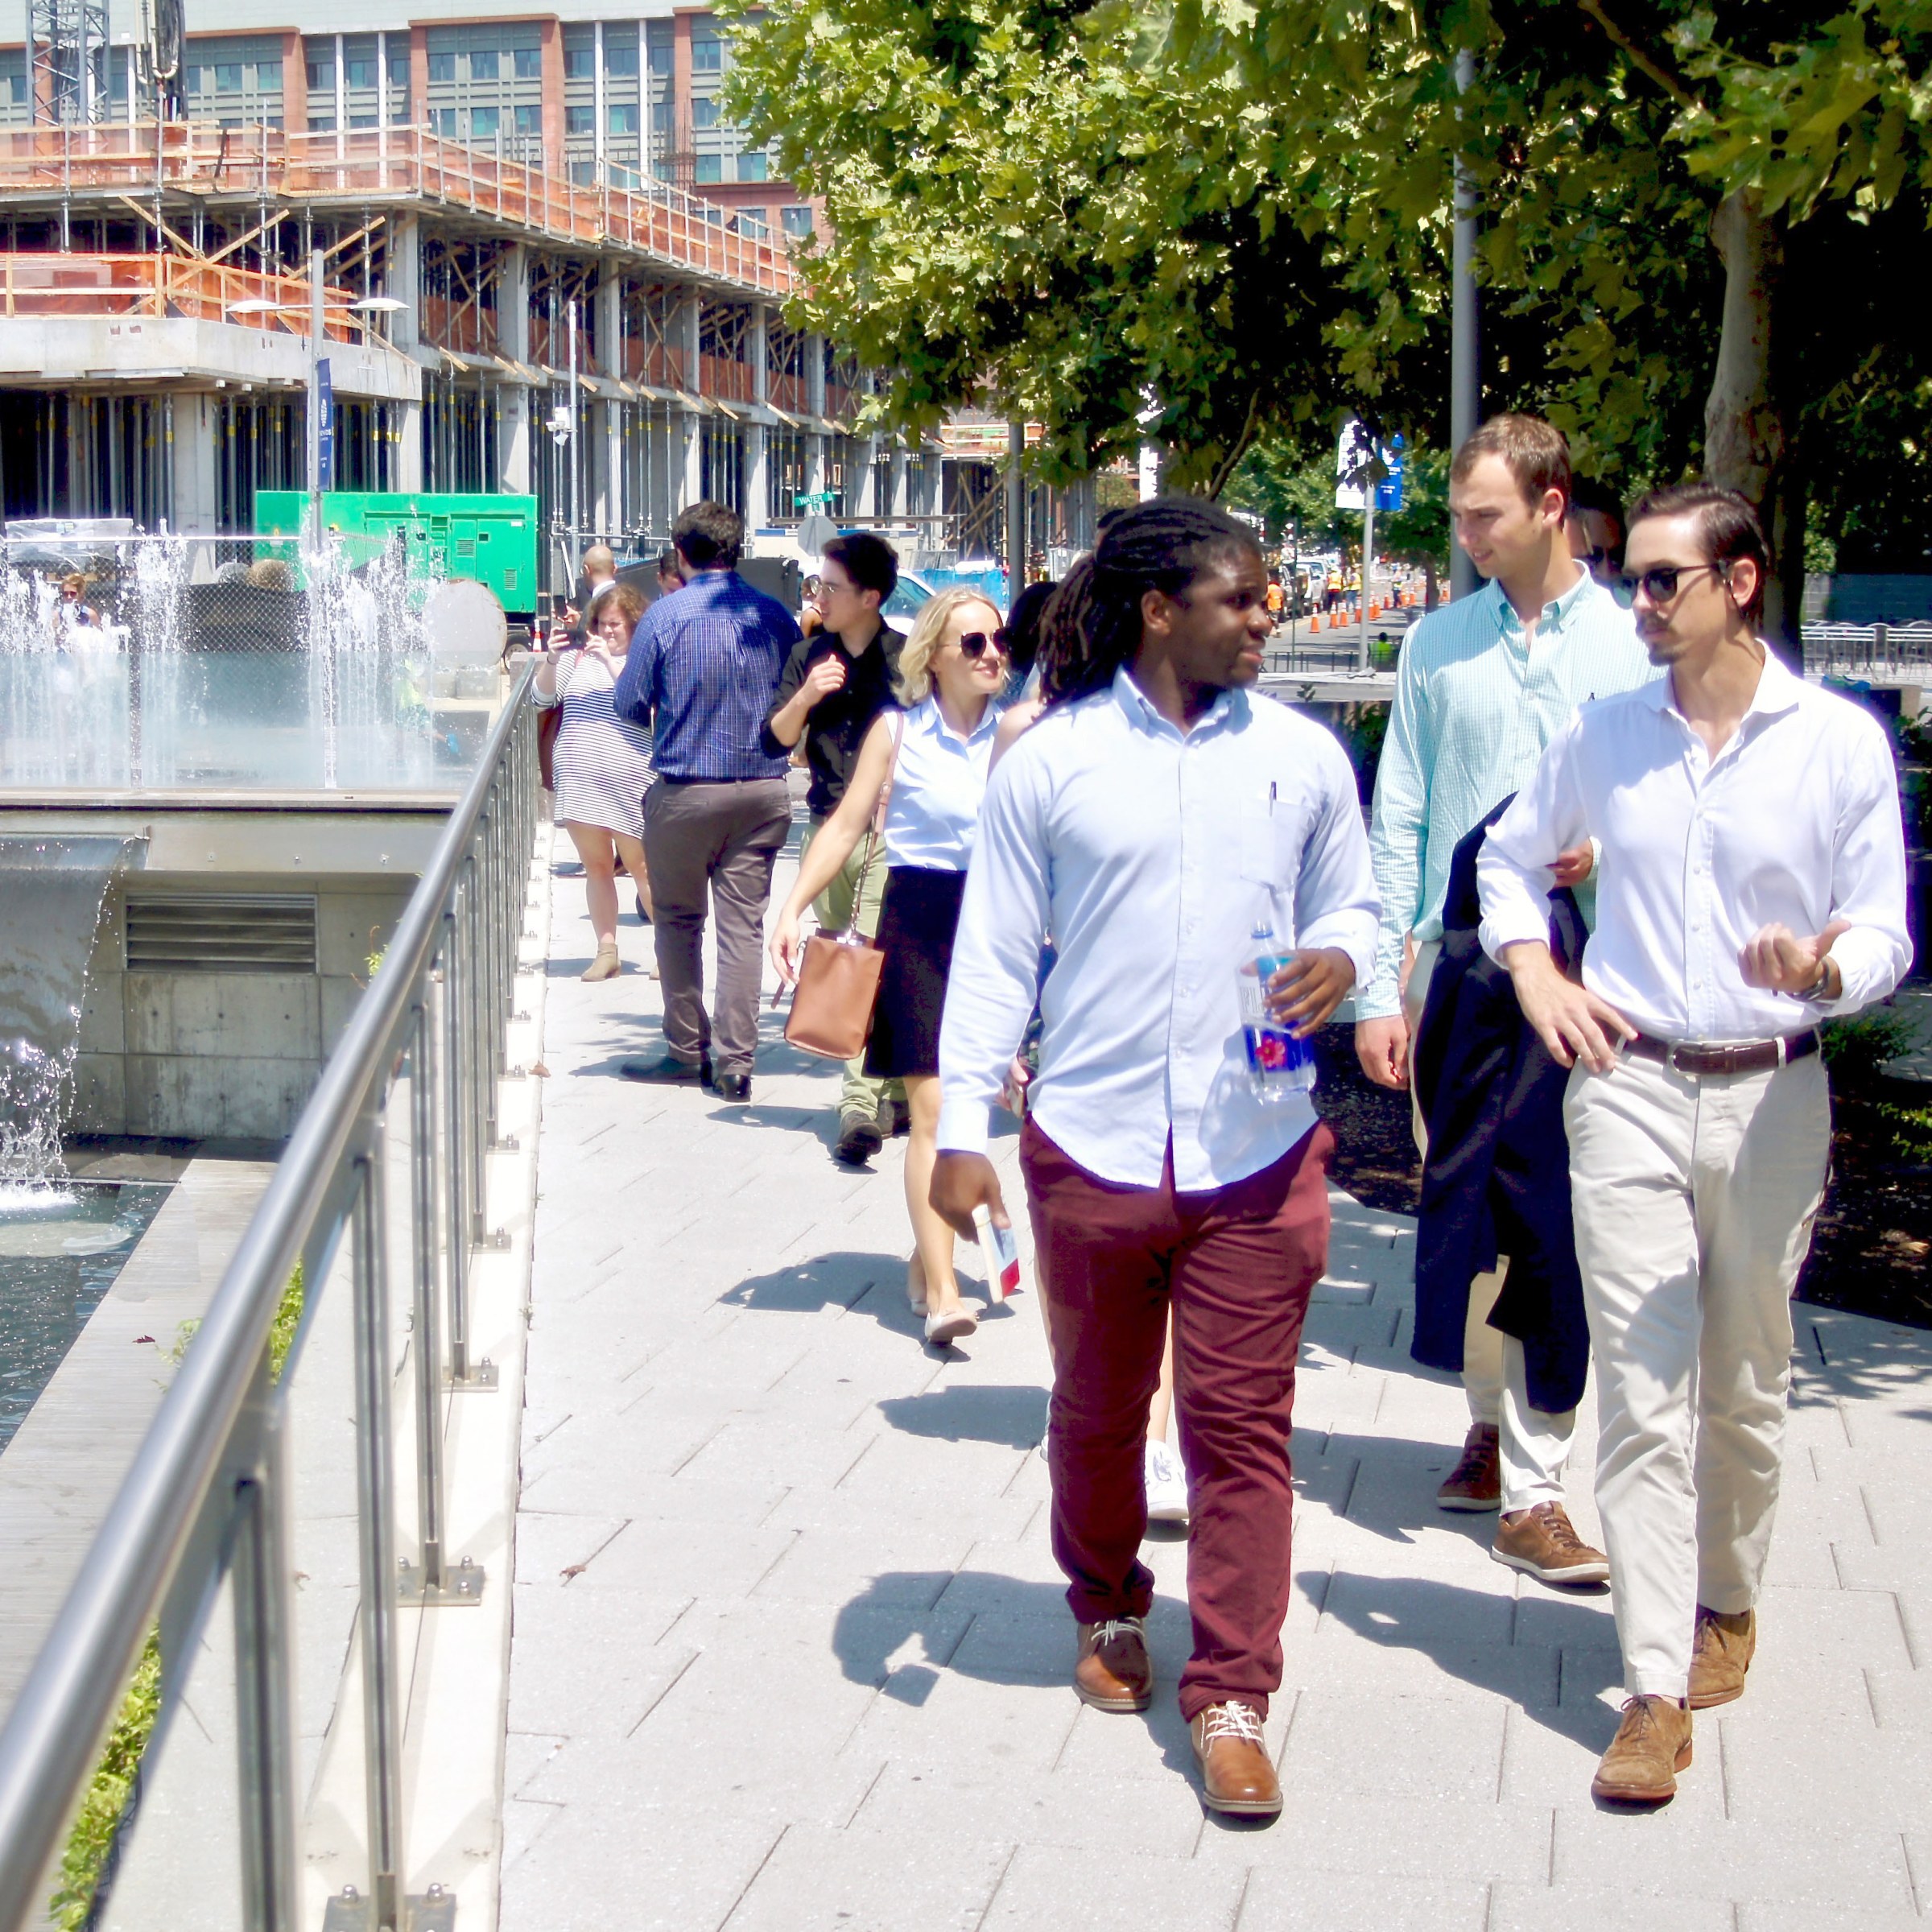 Group of people walking alongside a water feature with construction in the background